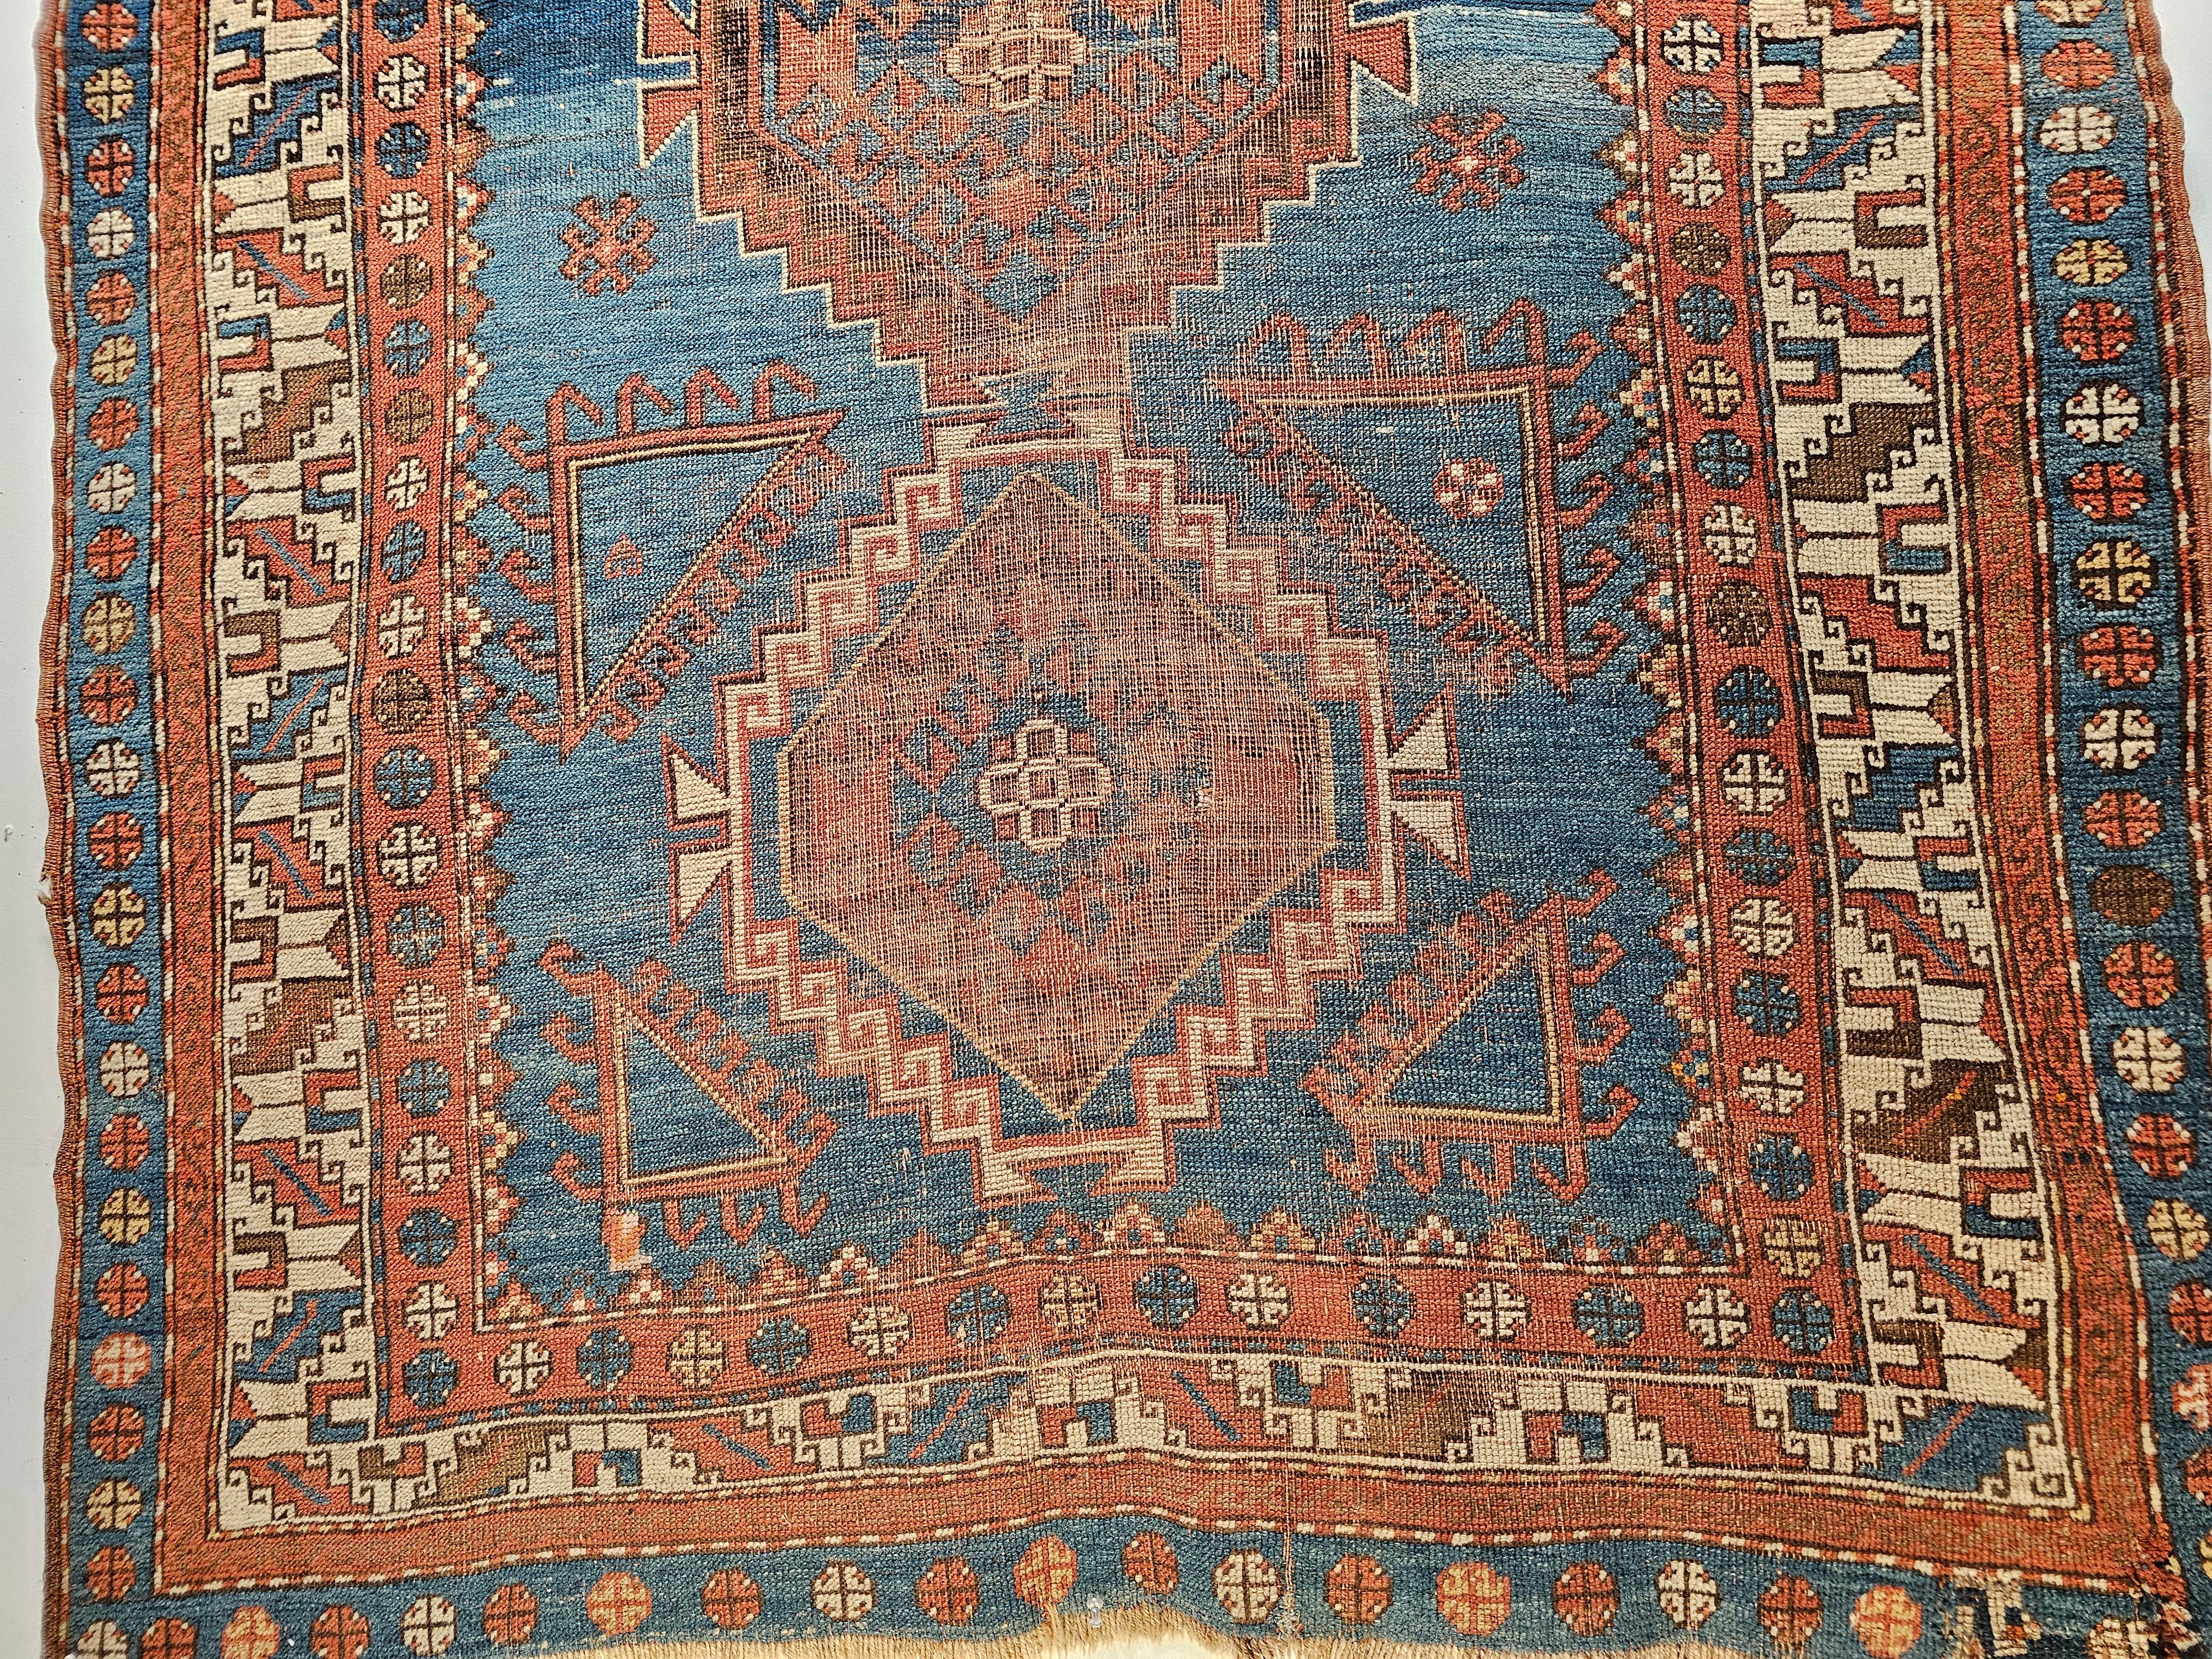 A beautiful Kazak area rug was woven in the 4th quarter of the 1800s. The artistry and craftsmanship are clearly visible in the use of high-quality materials and dyes. The rug has a very unique and desirable abrash French blue field color which is